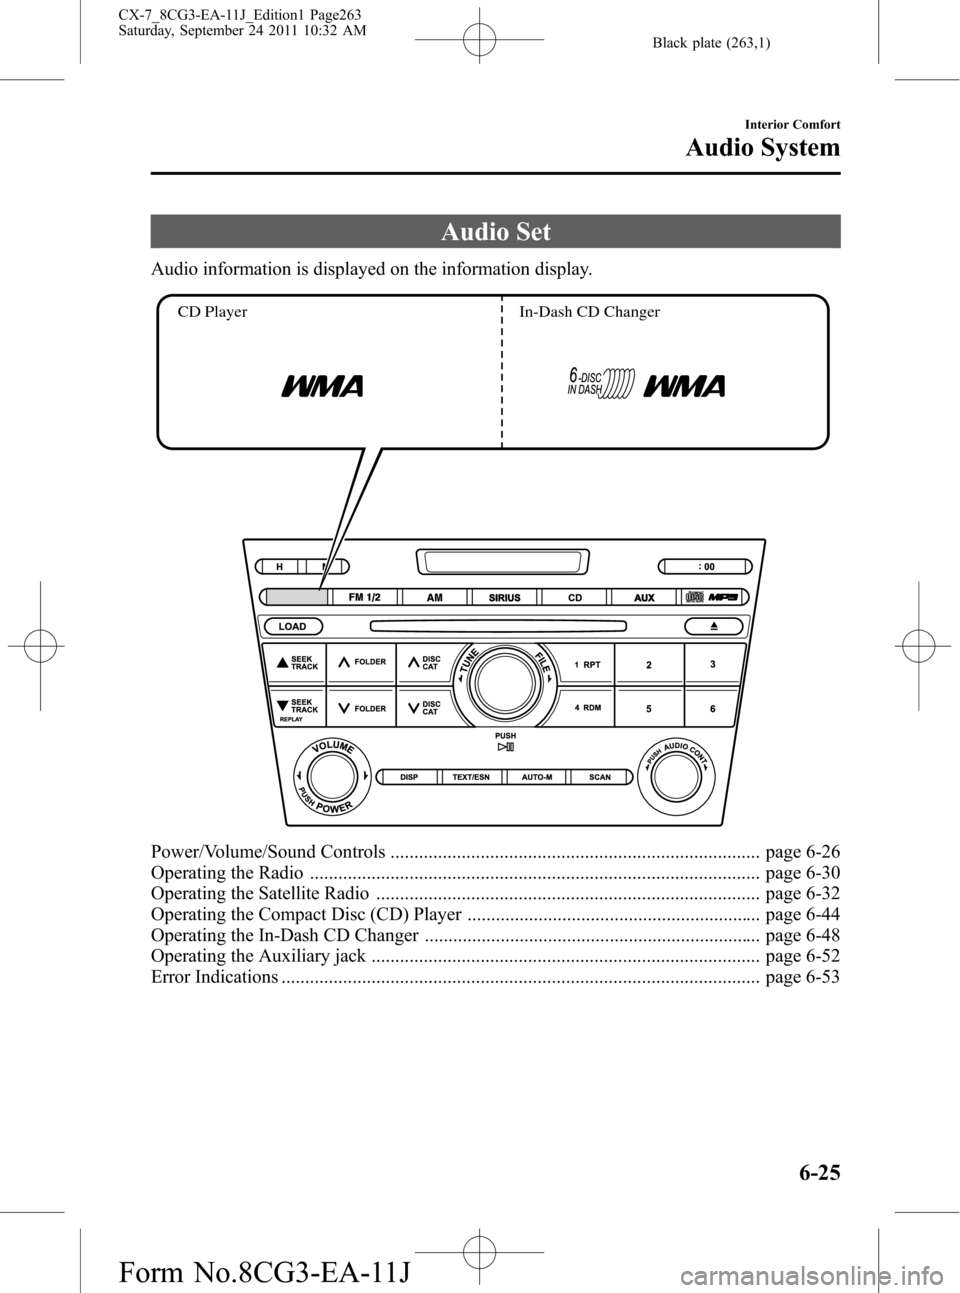 MAZDA MODEL CX-7 2012  Owners Manual (in English) Black plate (263,1)
Audio Set
Audio information is displayed on the information display.
CD Player In-Dash CD Changer
Power/Volume/Sound Controls ......................................................